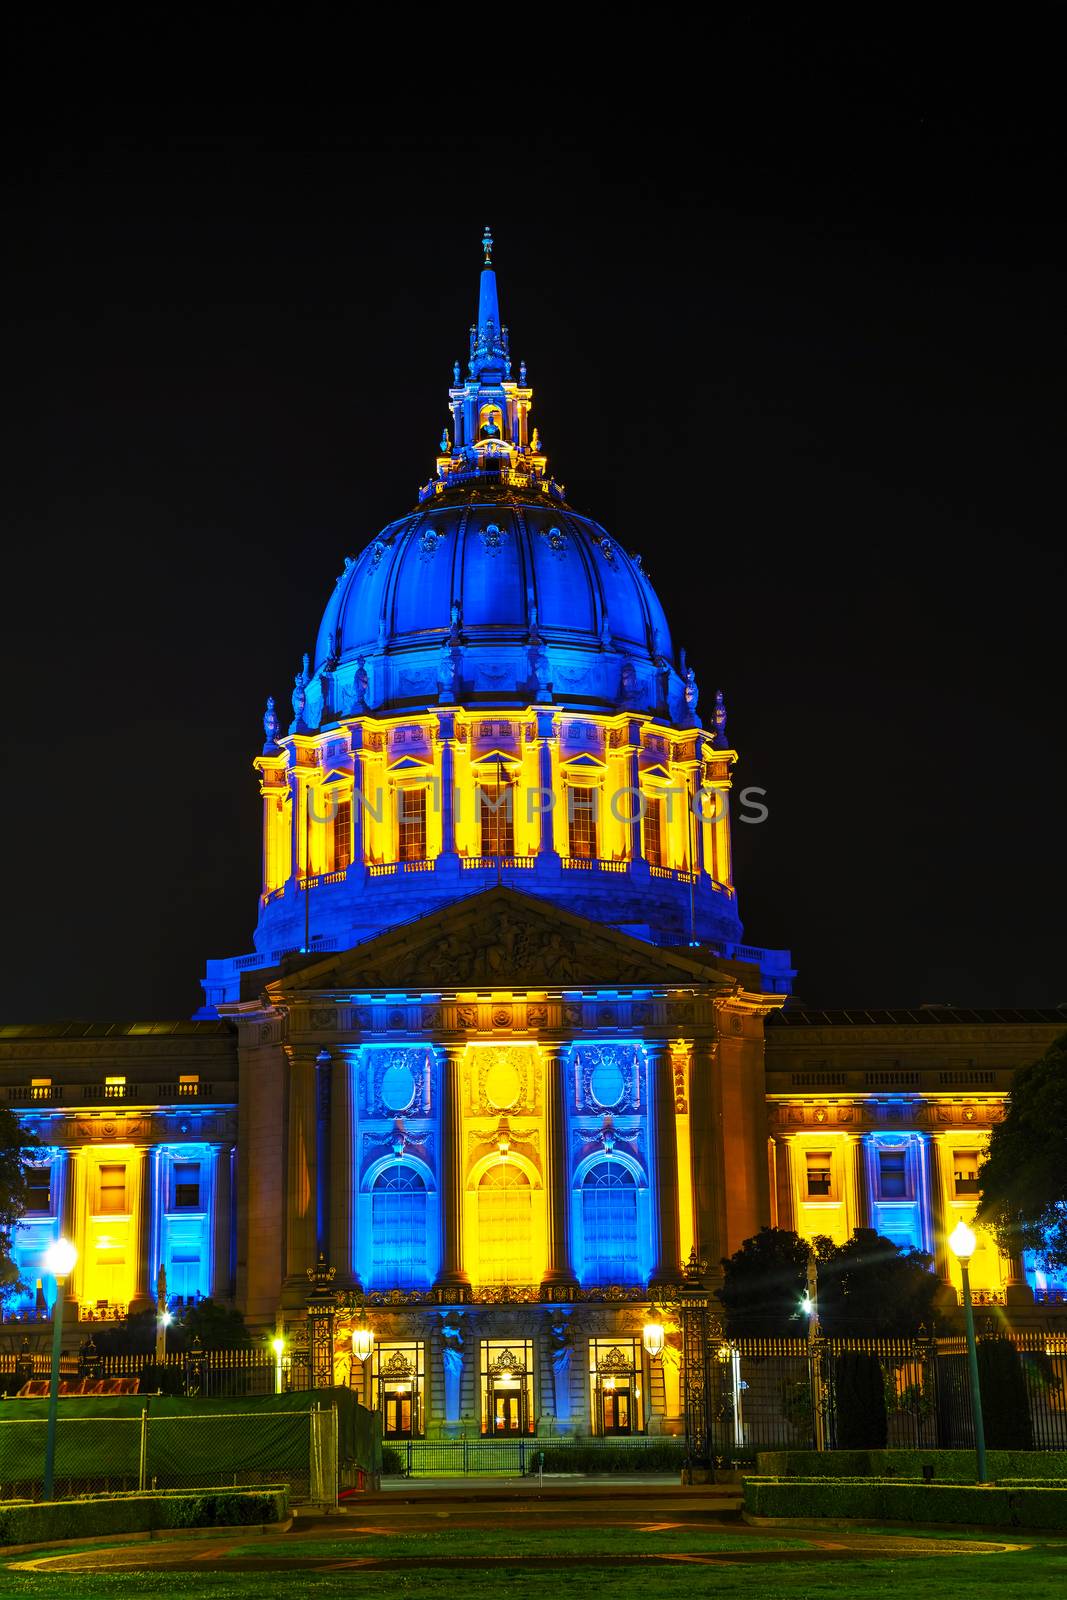 San Francisco city hall at night time by AndreyKr